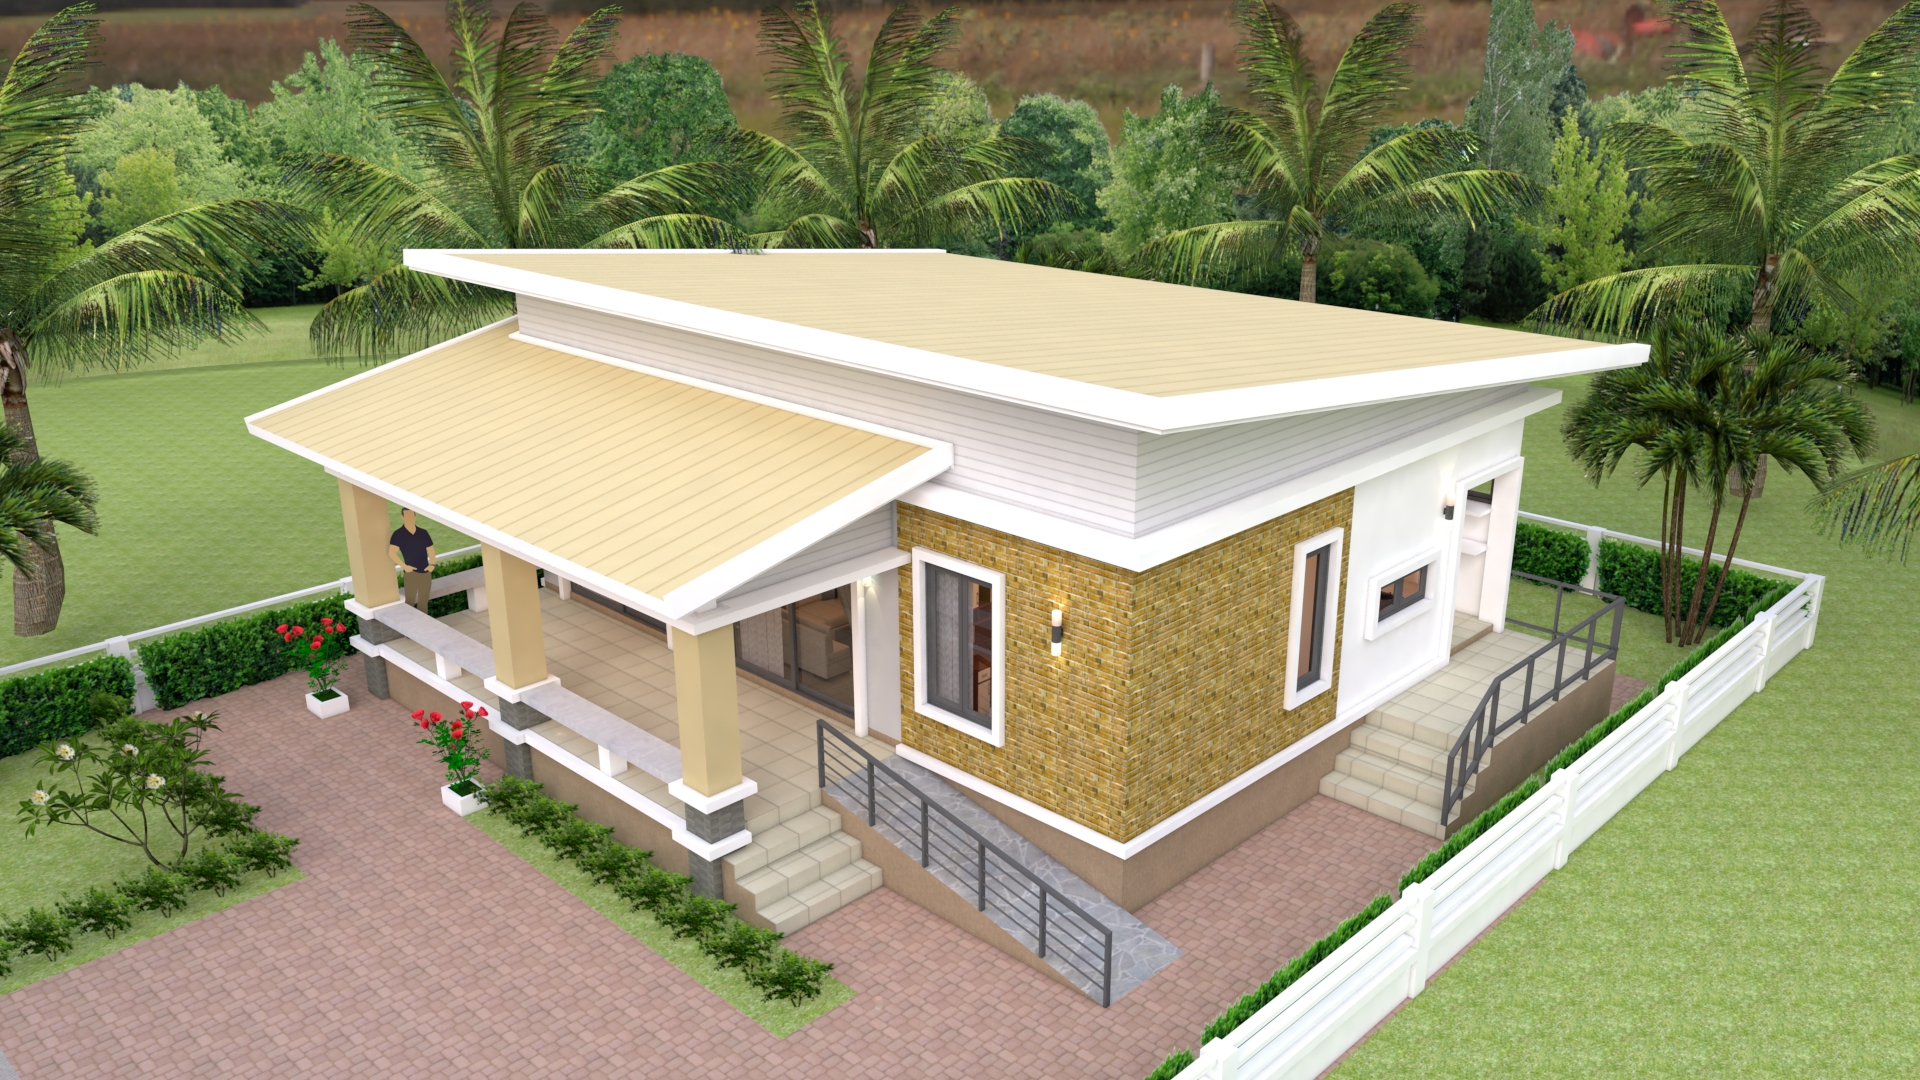 House Design 3d 10x10 Meter 33x33 Feet 3 Bedrooms Shed roof